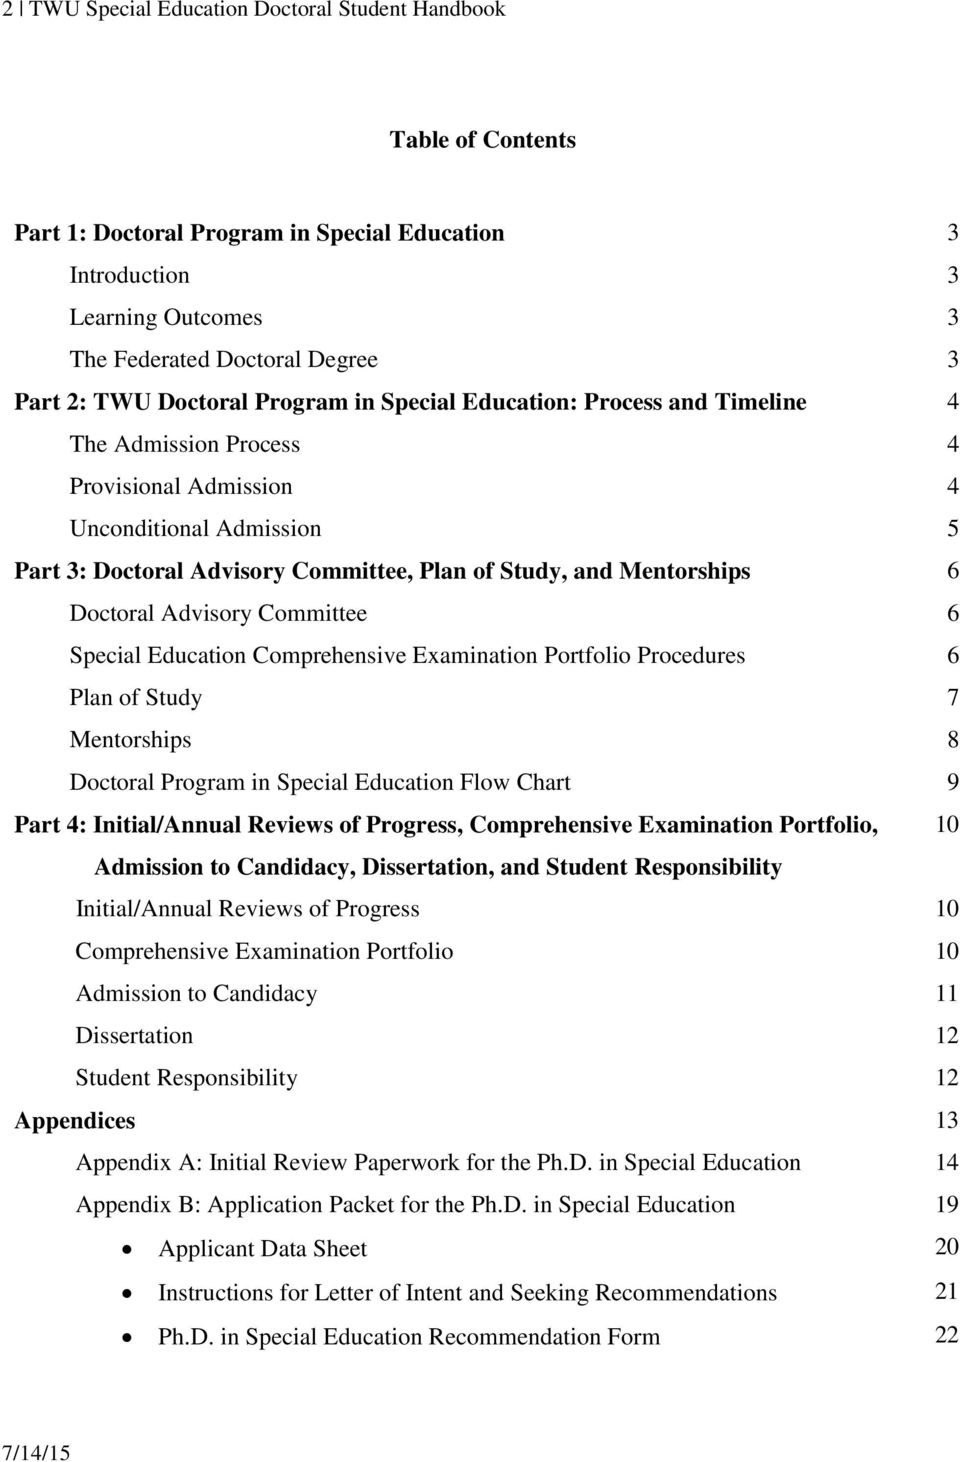 Mentorships 6 Doctoral Advisory Committee 6 Special Education Comprehensive Examination Portfolio Procedures 6 Plan of Study 7 Mentorships 8 Doctoral Program in Special Education Flow Chart 9 Part 4: